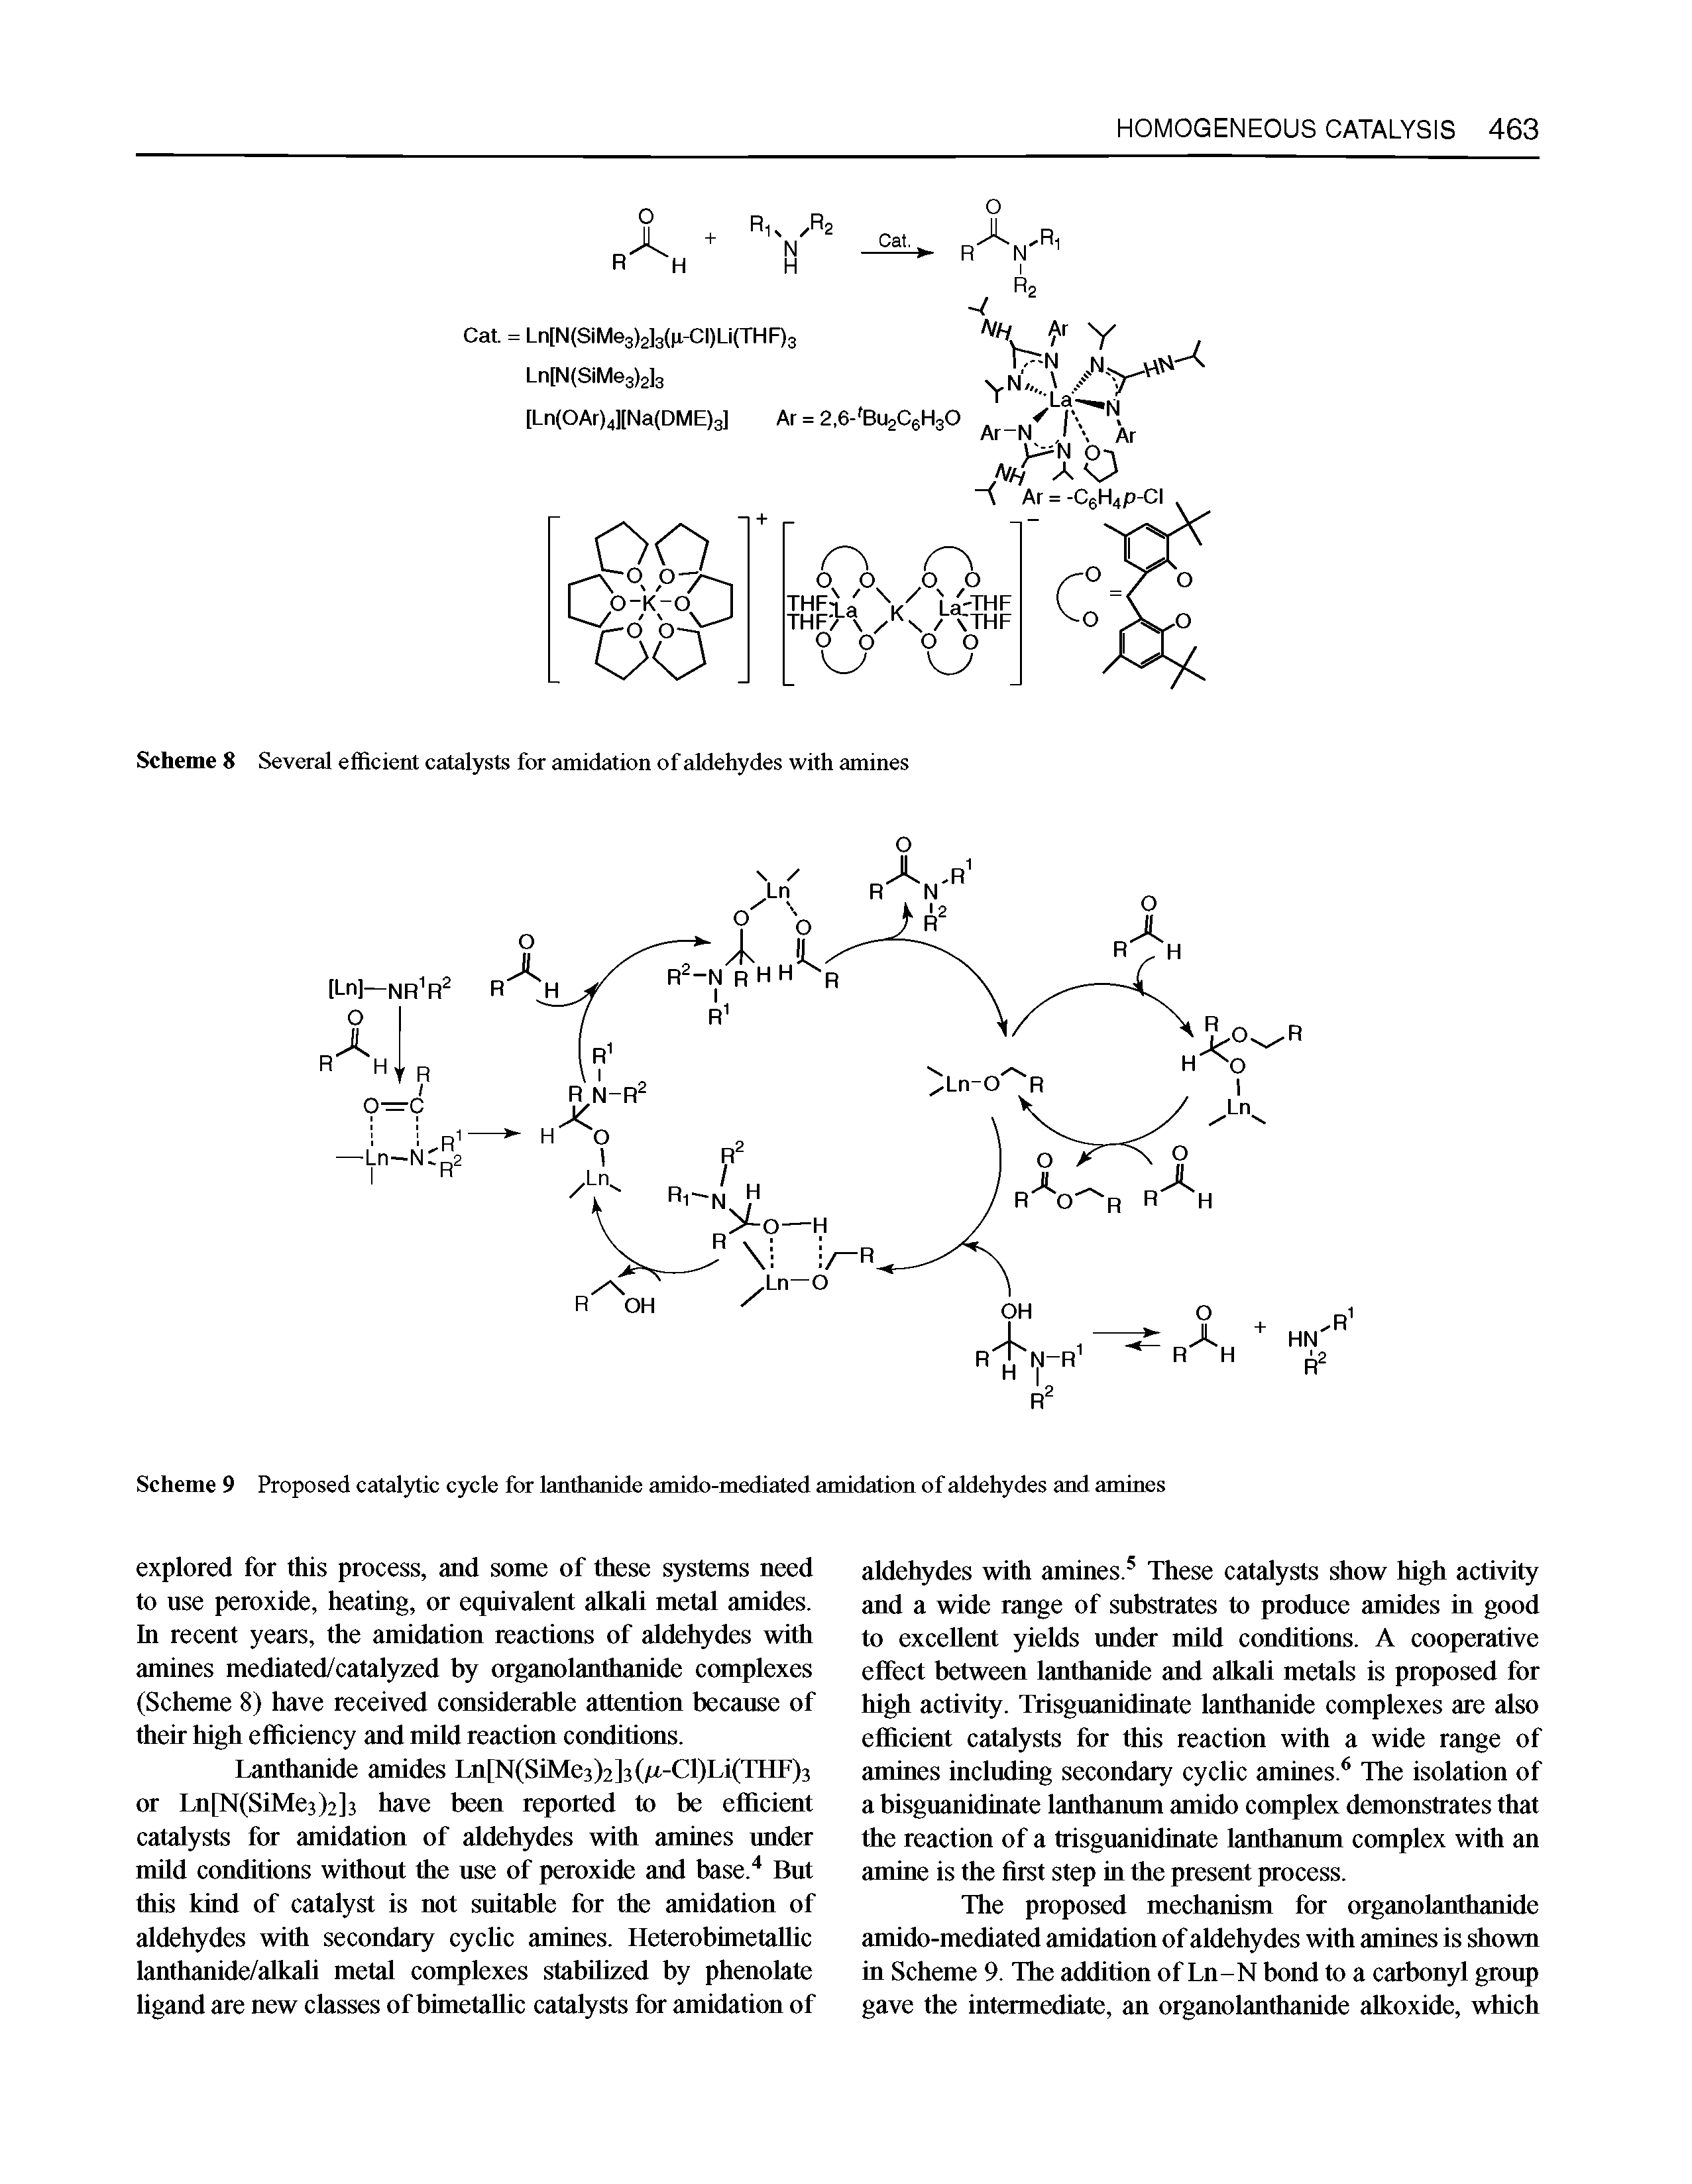 Scheme 8 Several efficient catalysts for amidation of aldehydes with amines...